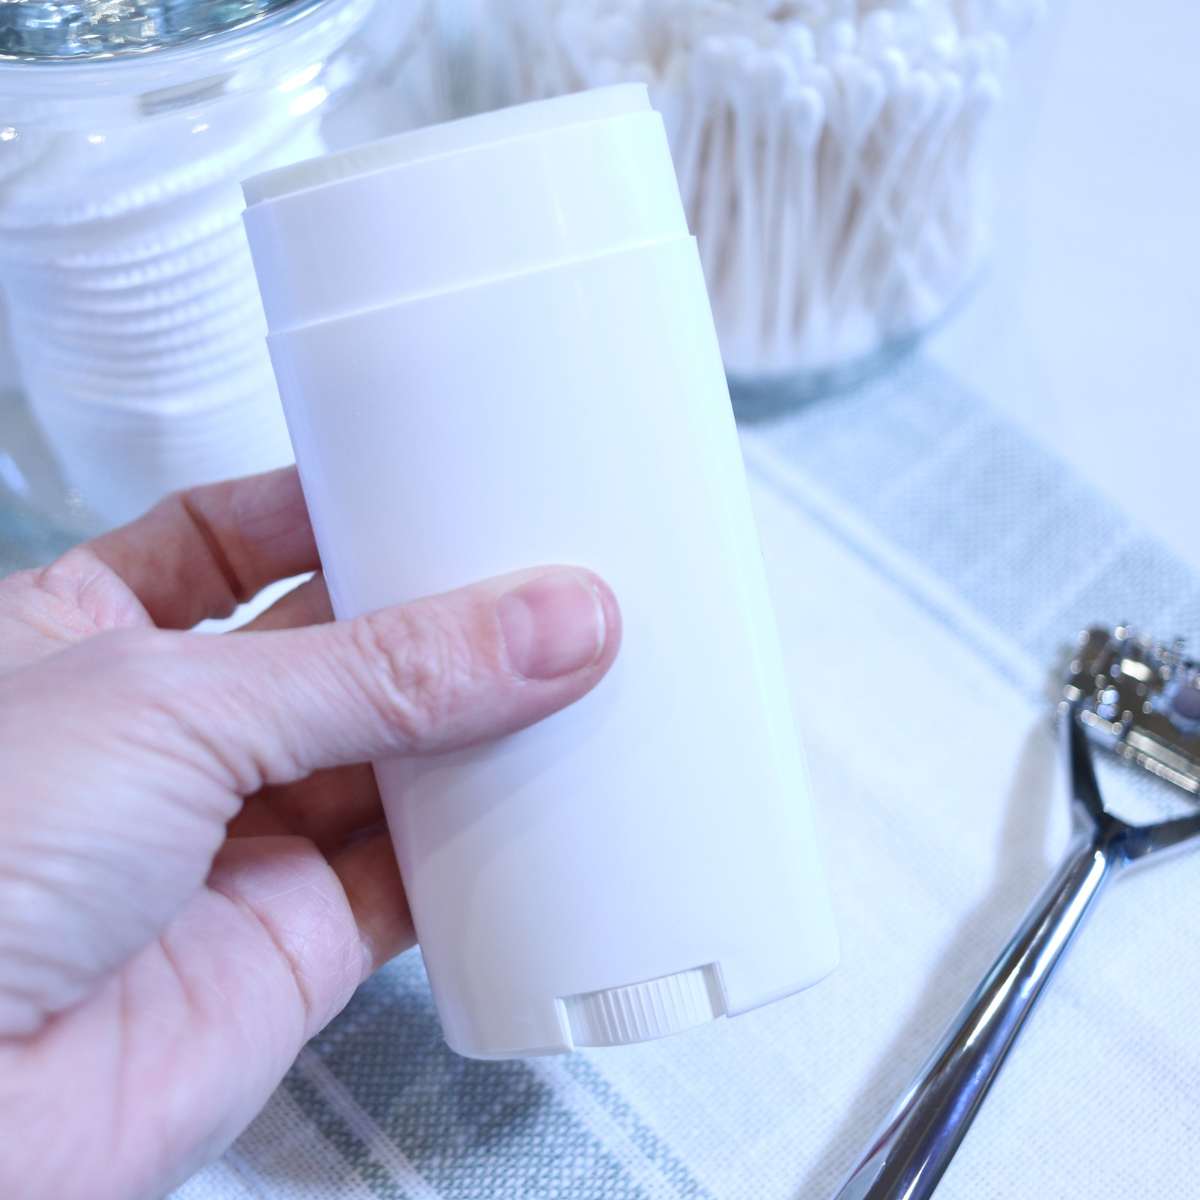 A womans hand is holding onto a white plastic tube of DIY natural deodorant she just made. A silver razor is also sitting on the table near glass jars filled with q-tips and cotton rounds.